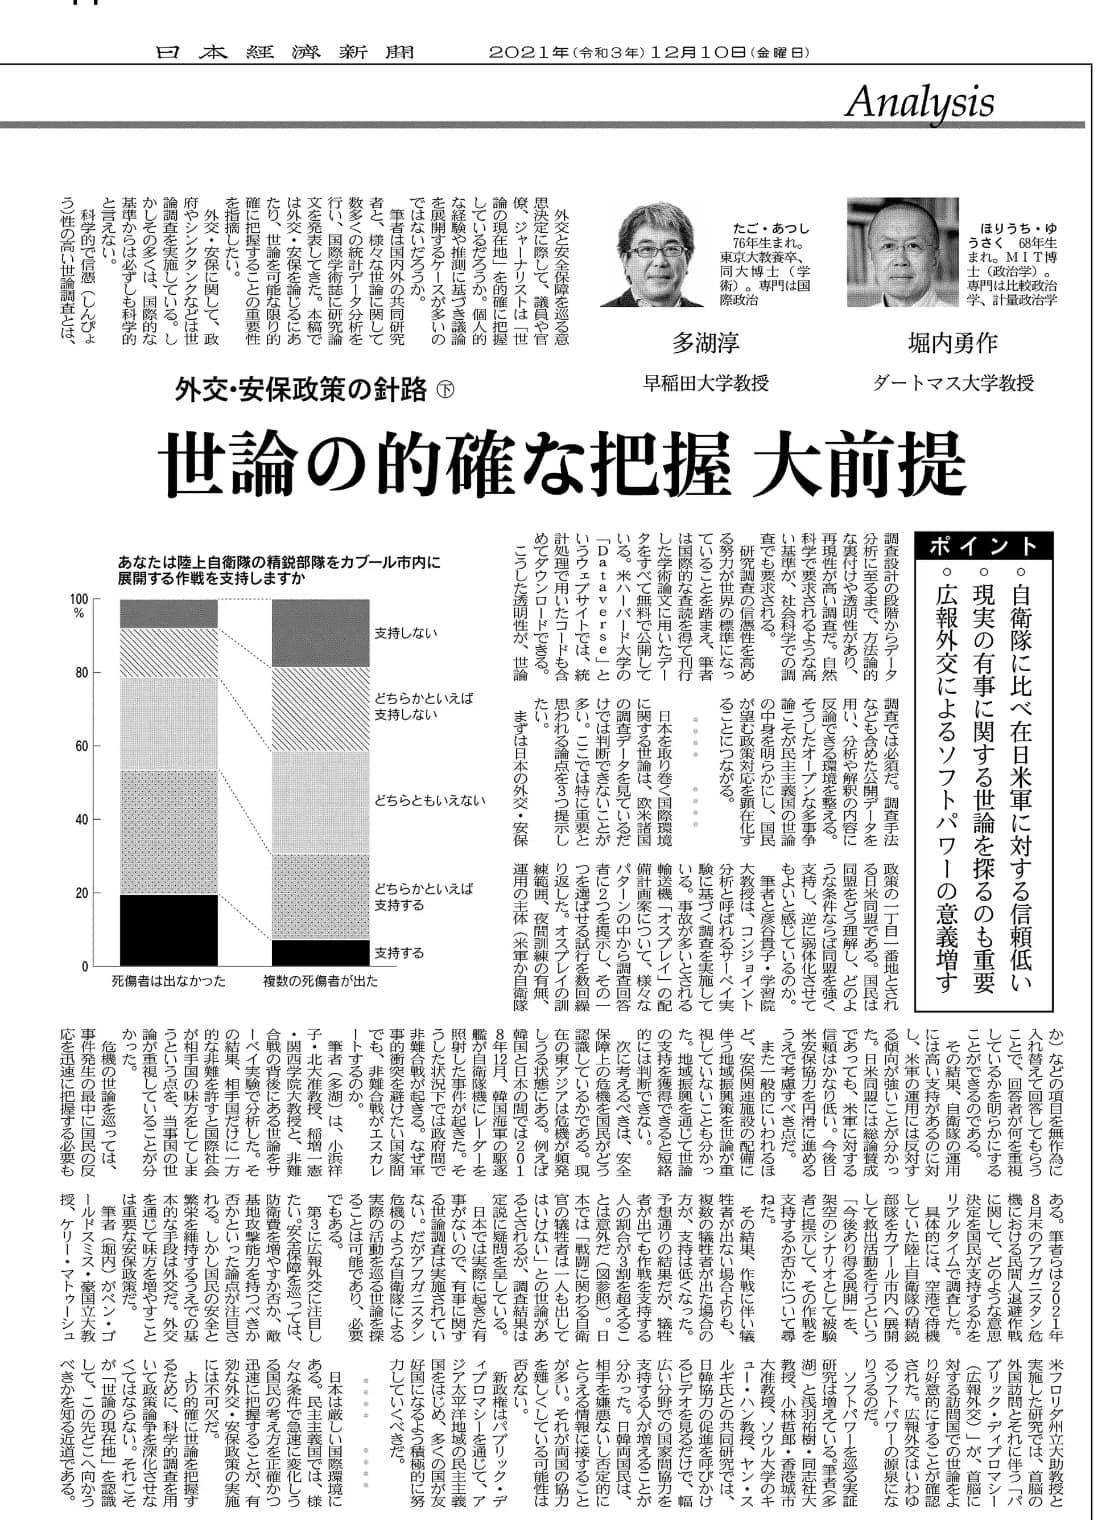 Published an op-ed in Nikkei